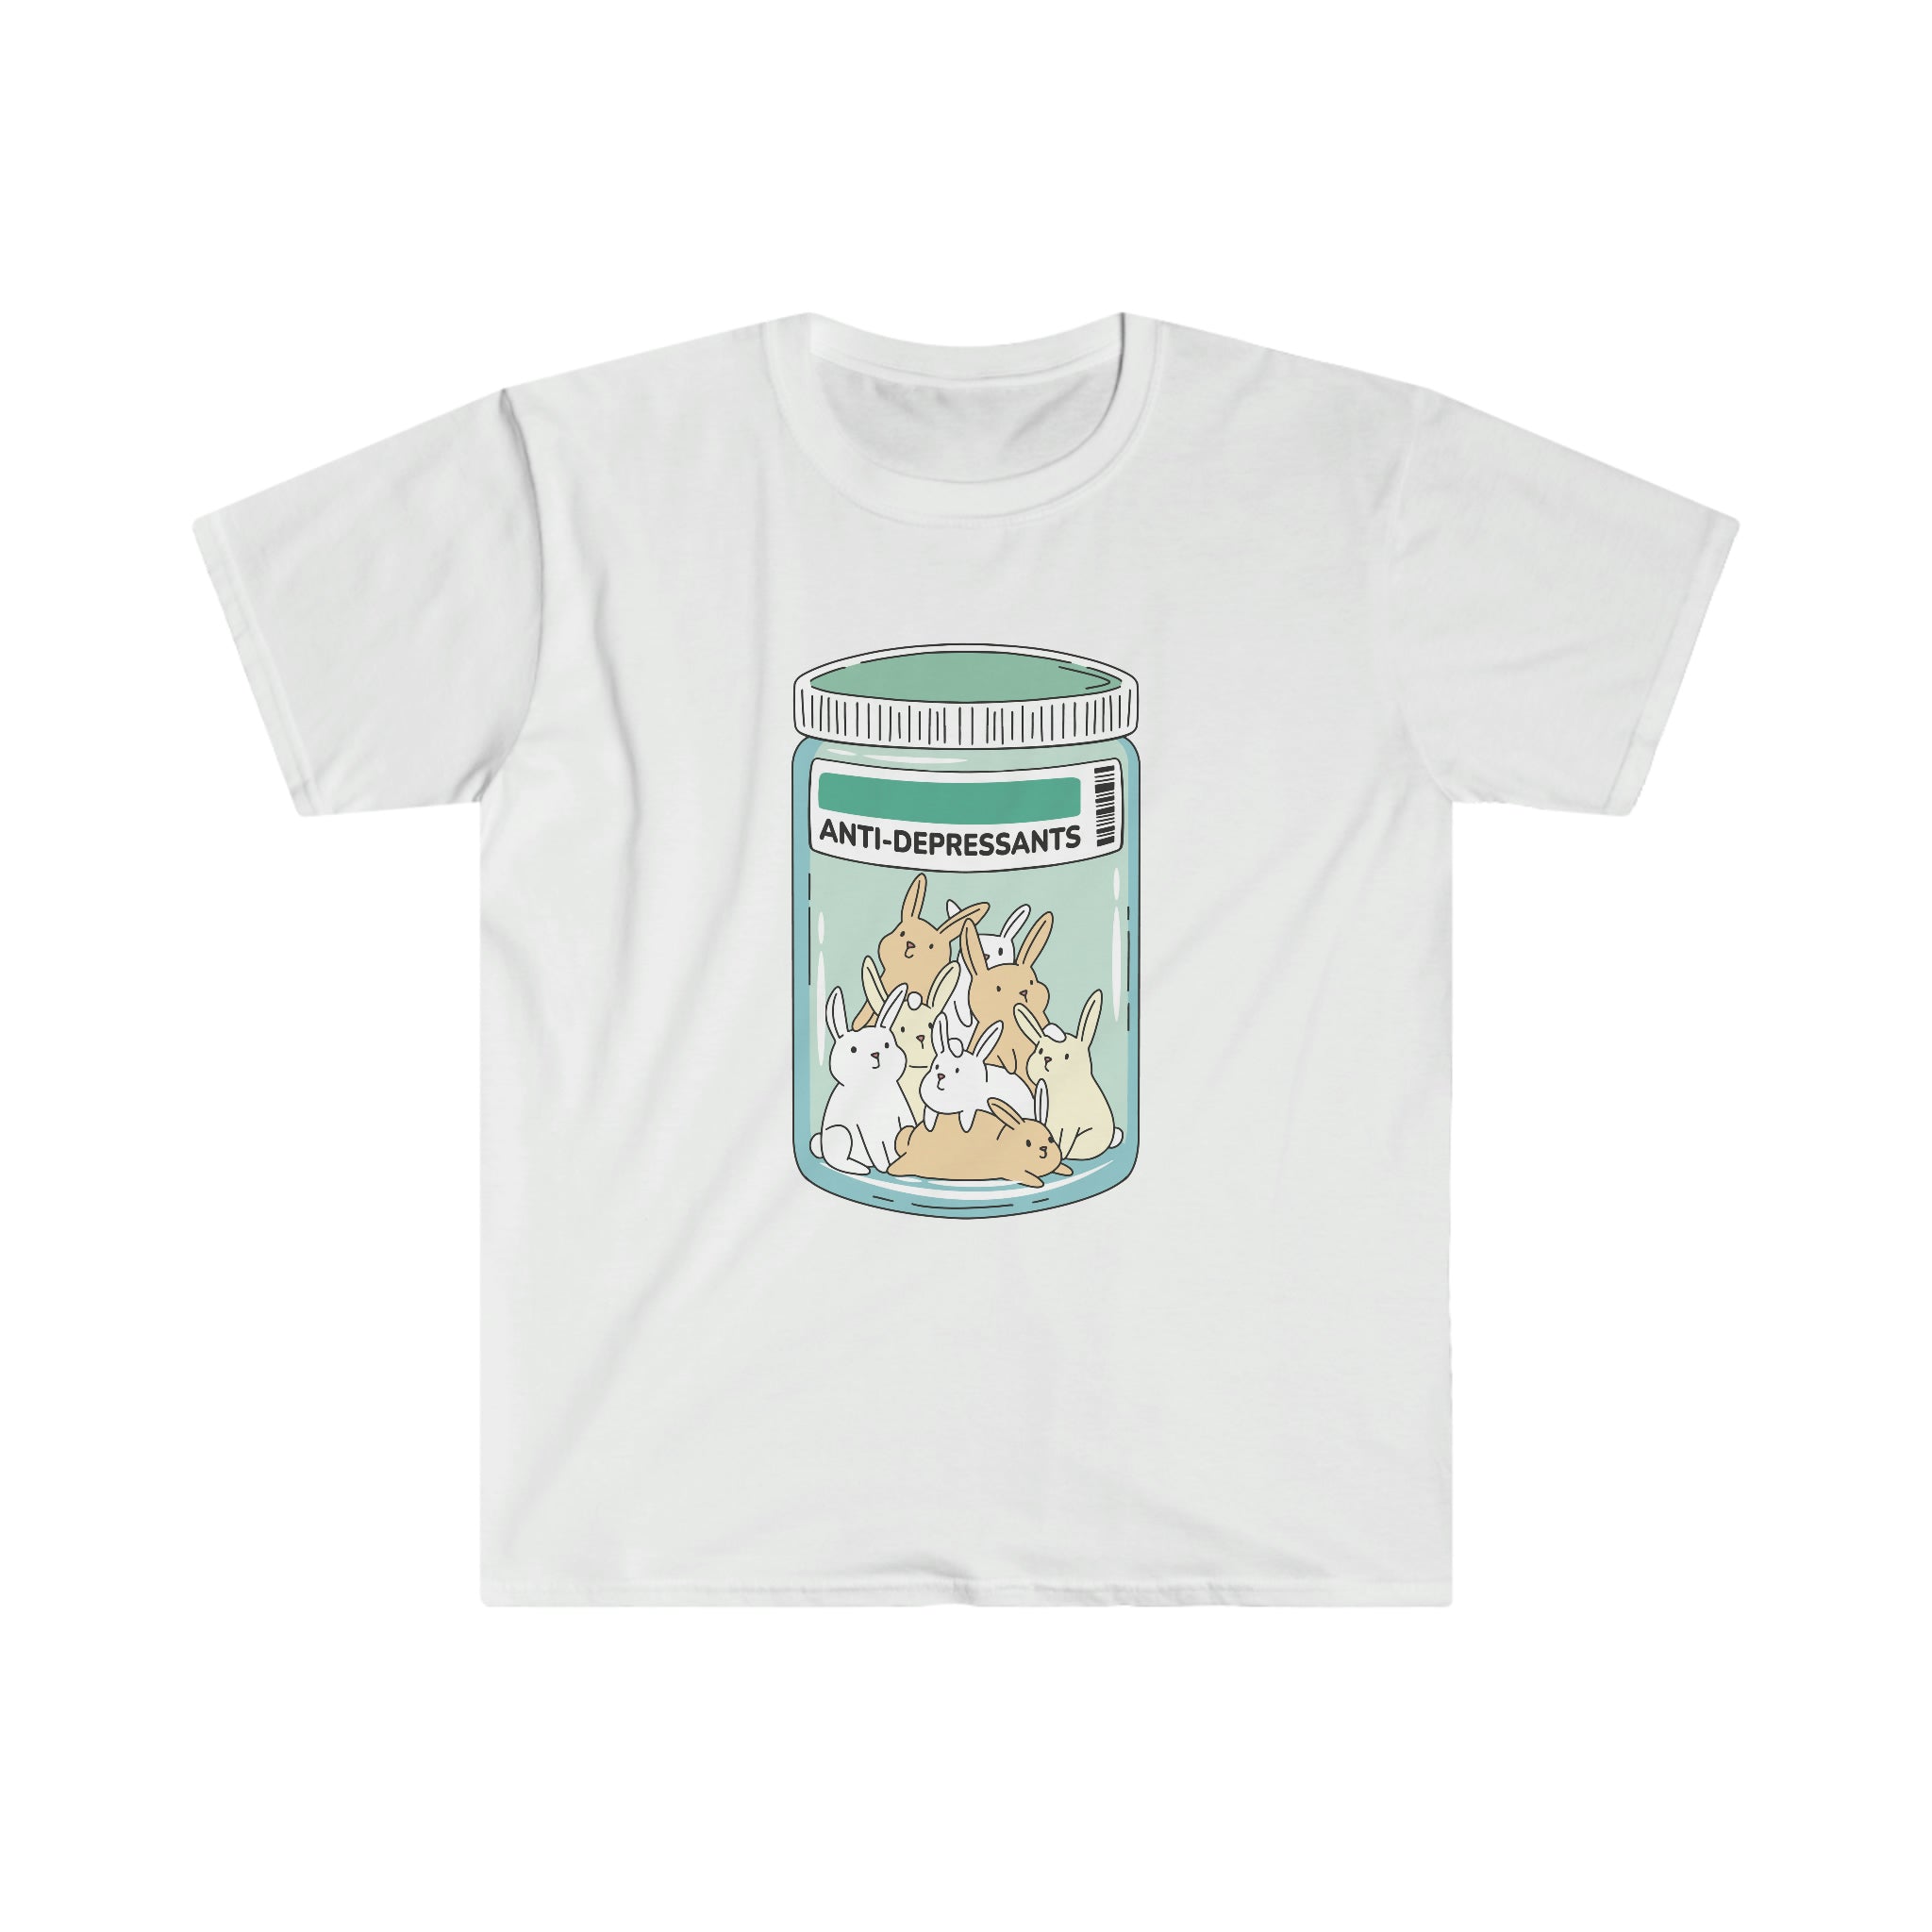 Antidepressants Bunnies T-Shirt featuring an image of a rabbit in a jar, perfect for those who love quirky style.